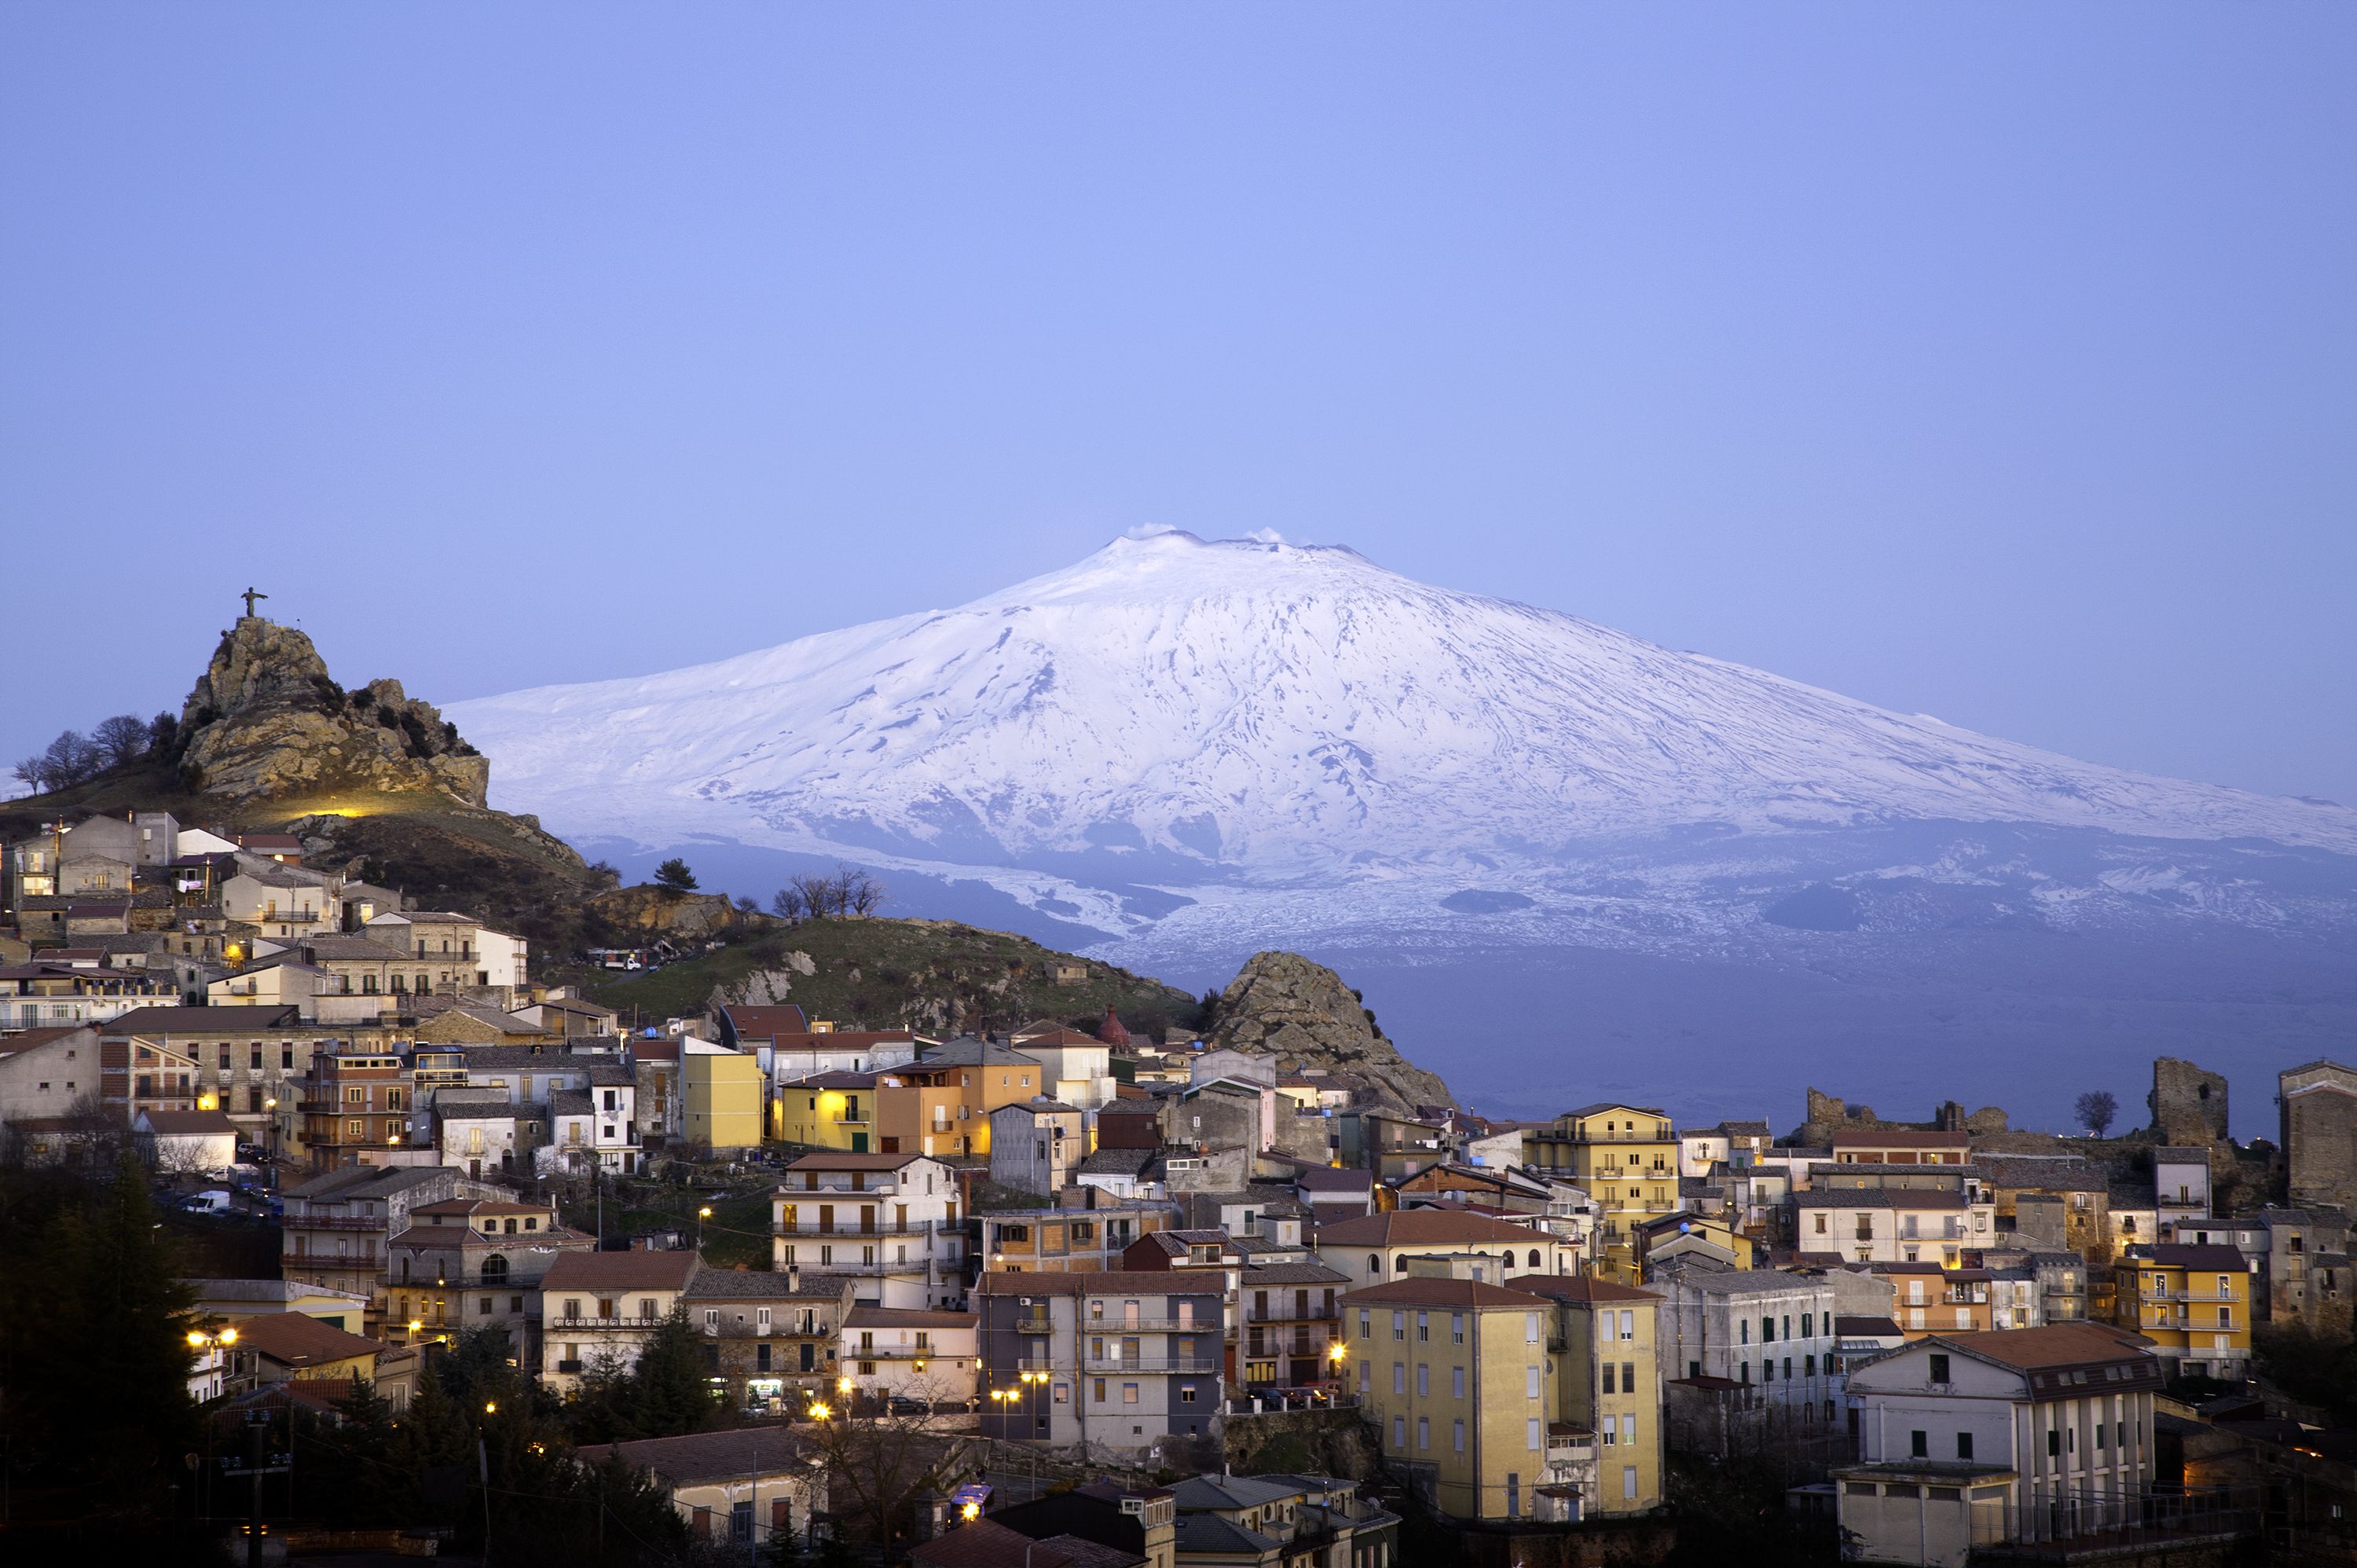 <p><b>Italy</b><b>Elevation: </b>10,922 feet (changes often due to activity) </p>Mount Etna is an active volcano in the Milo region of Sicily. Etna is also the highest mountain in Italy and among the most active volcanoes in the world. Stop by <a href="https://www.summerinitaly.com/guide/parco-dell-etna">Parco dell’Etna</a> on the eastern slope of the mountain to catch lectures and exhibits at the visitor’s center.